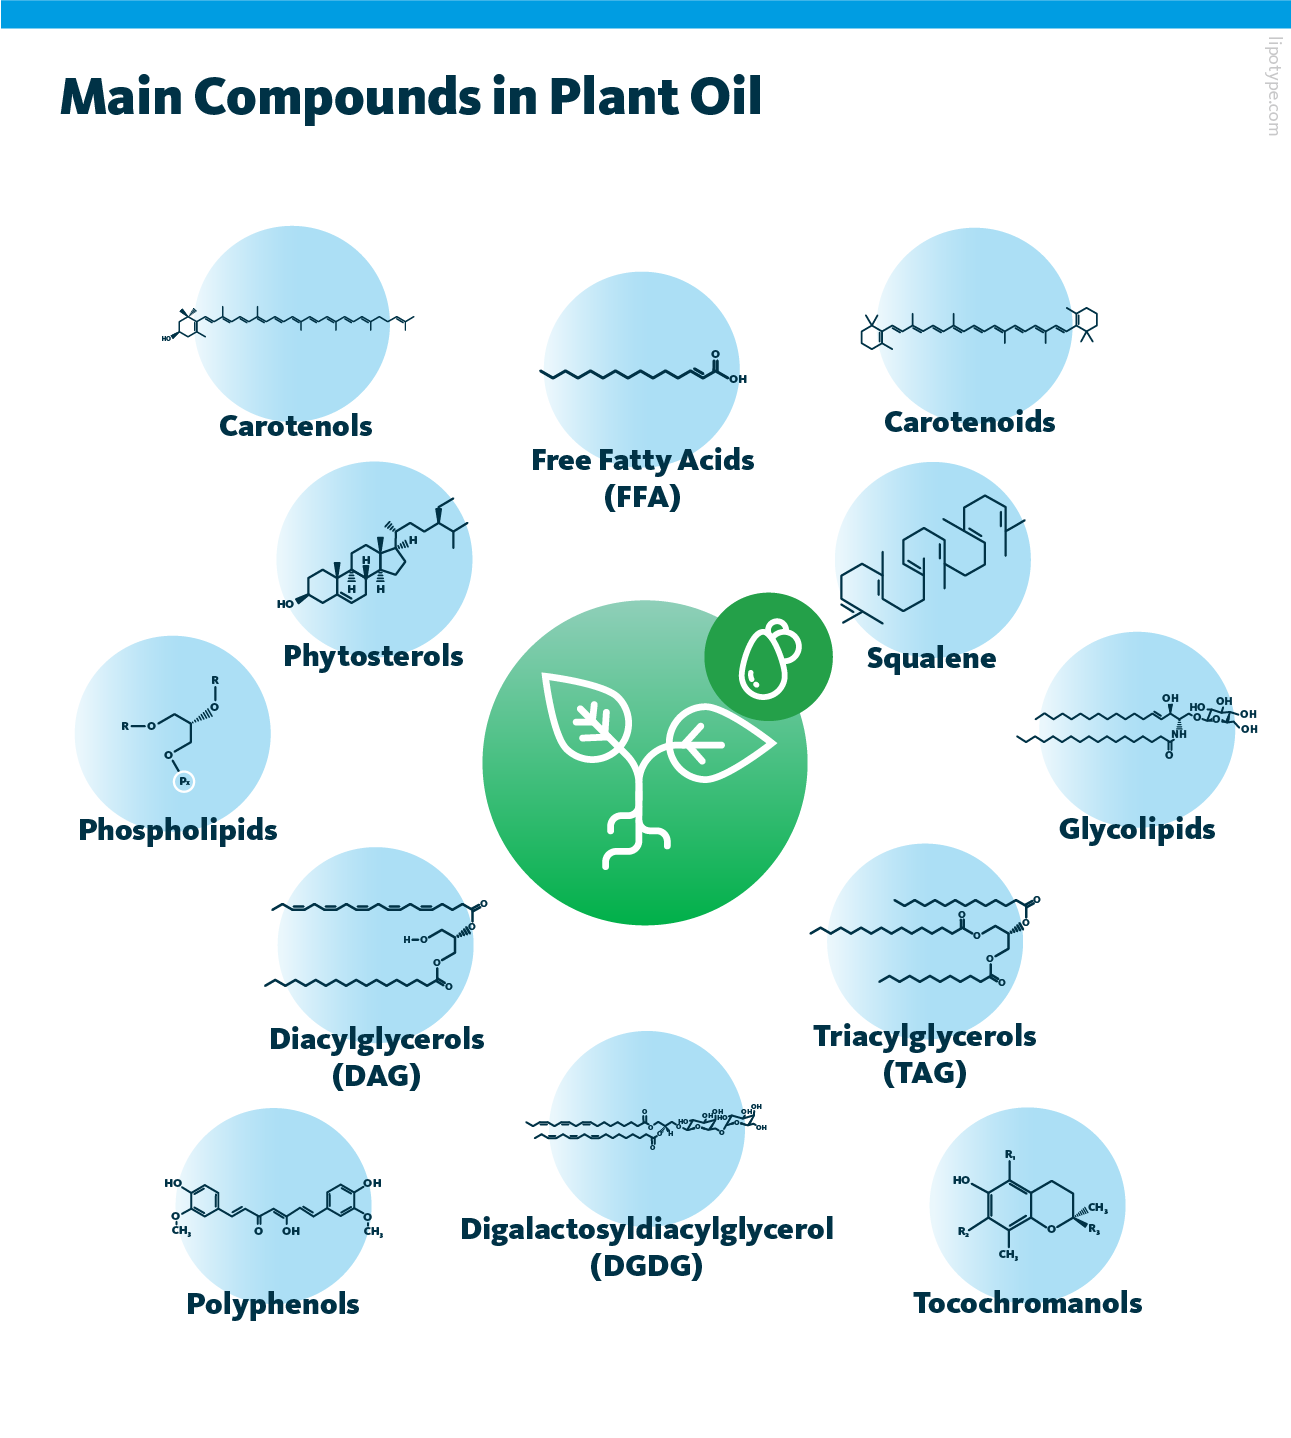 Main compounds in plant oil.